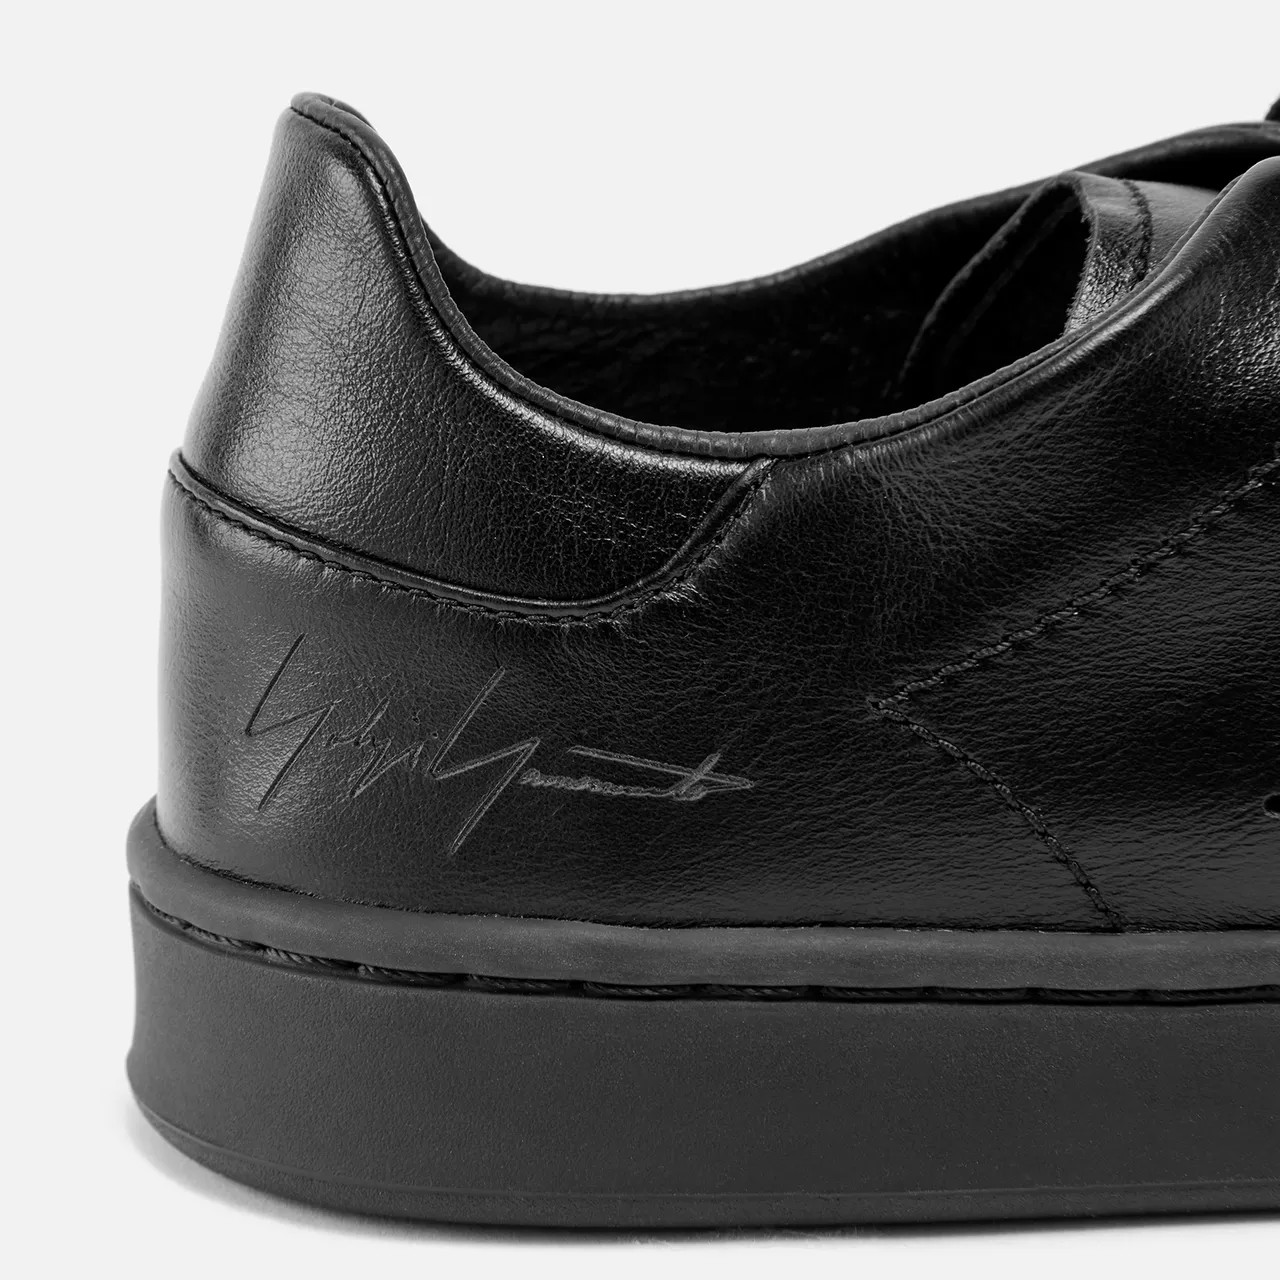 Y-3 Men's Stan Smith Leather Trainers - UK